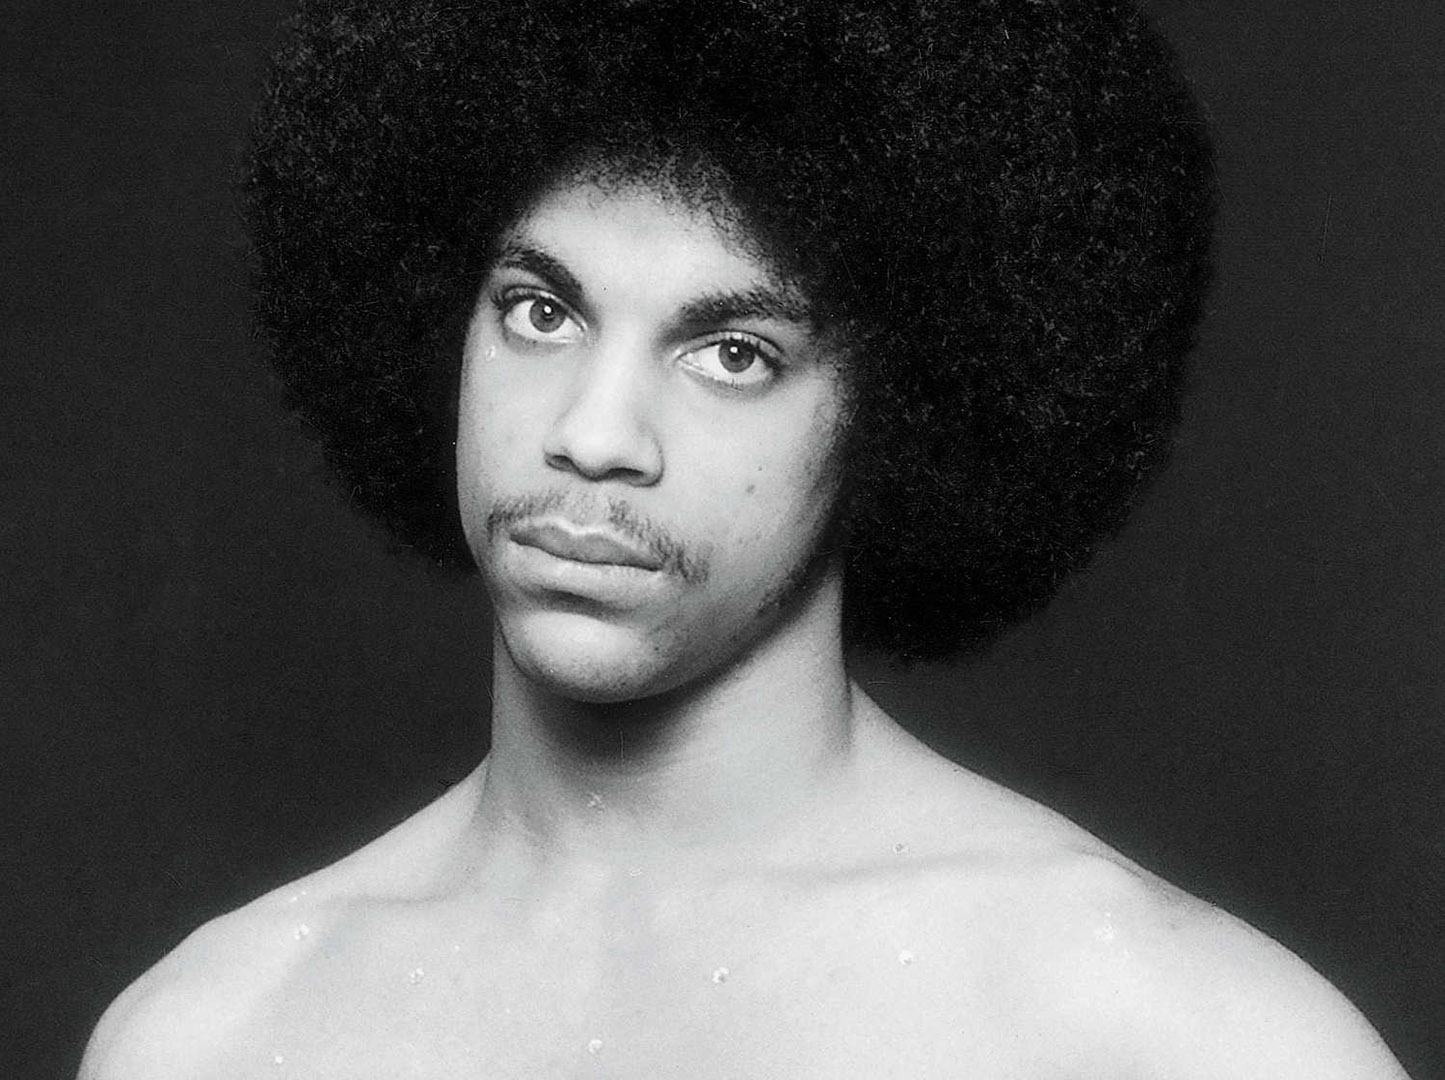 Prince: A personal remembrance of ‘one of the greatest musicians of all time’